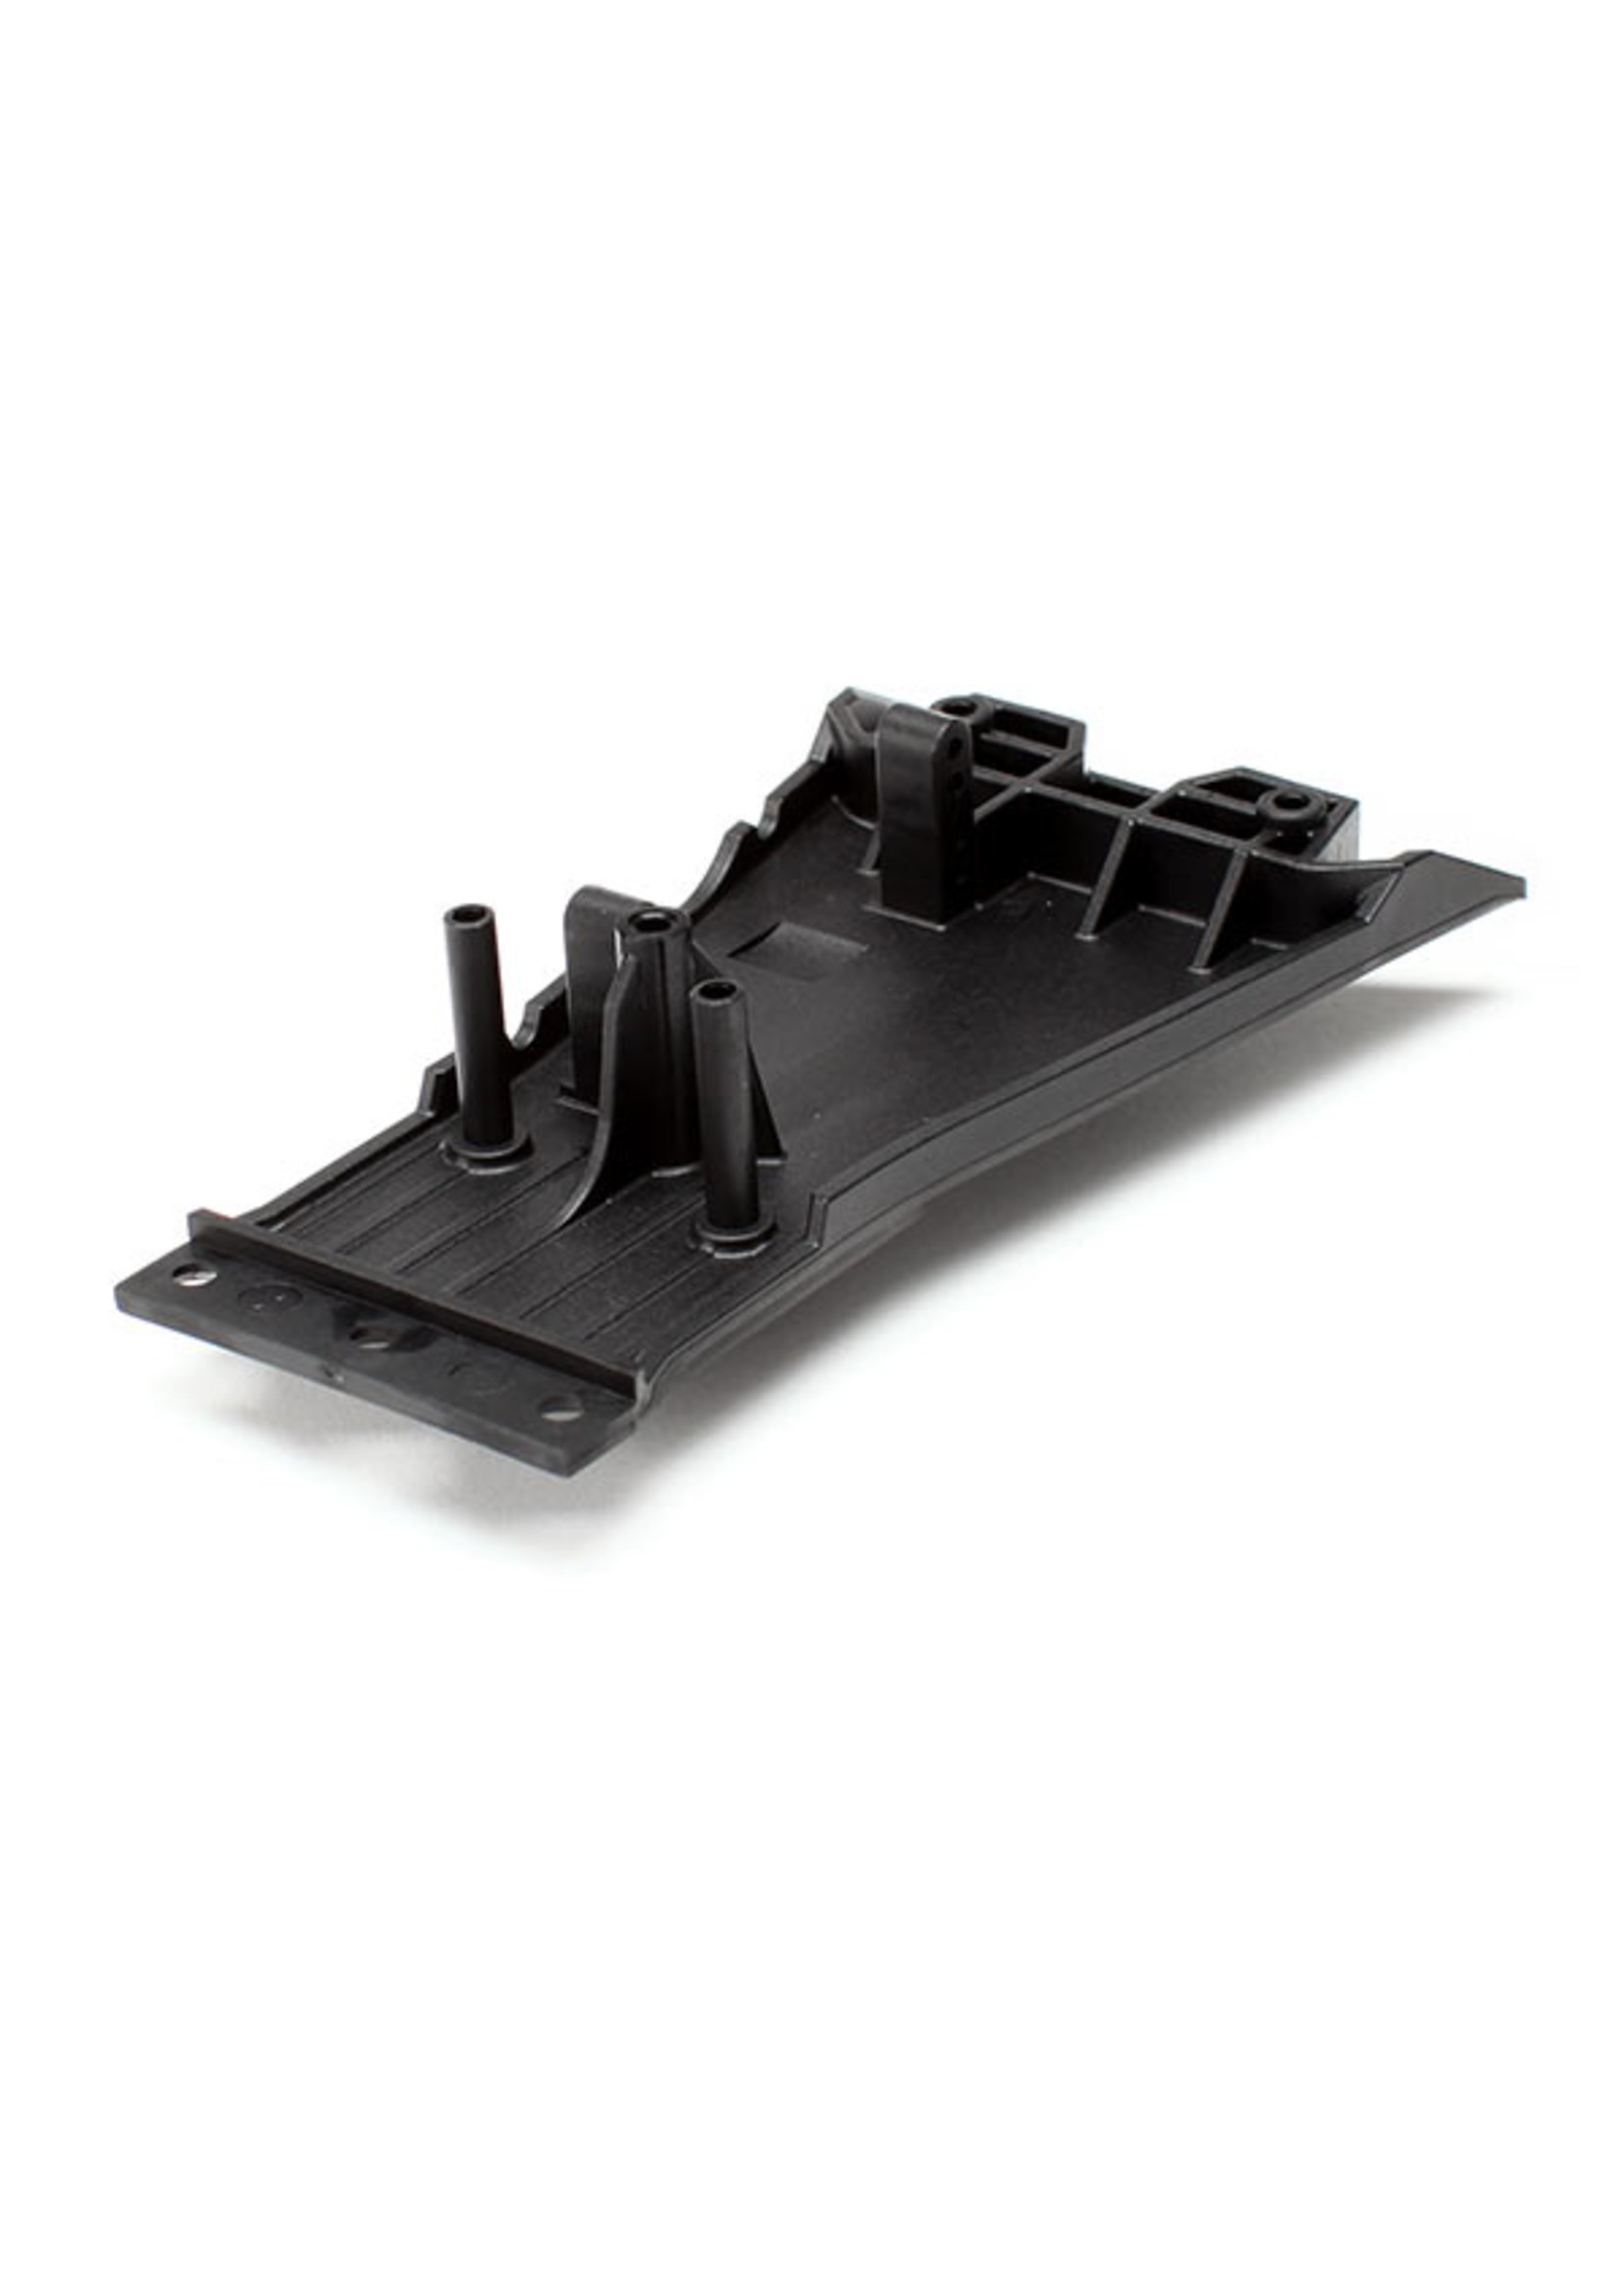 Traxxas 5831 - Lower Chassis - Low CG - Black